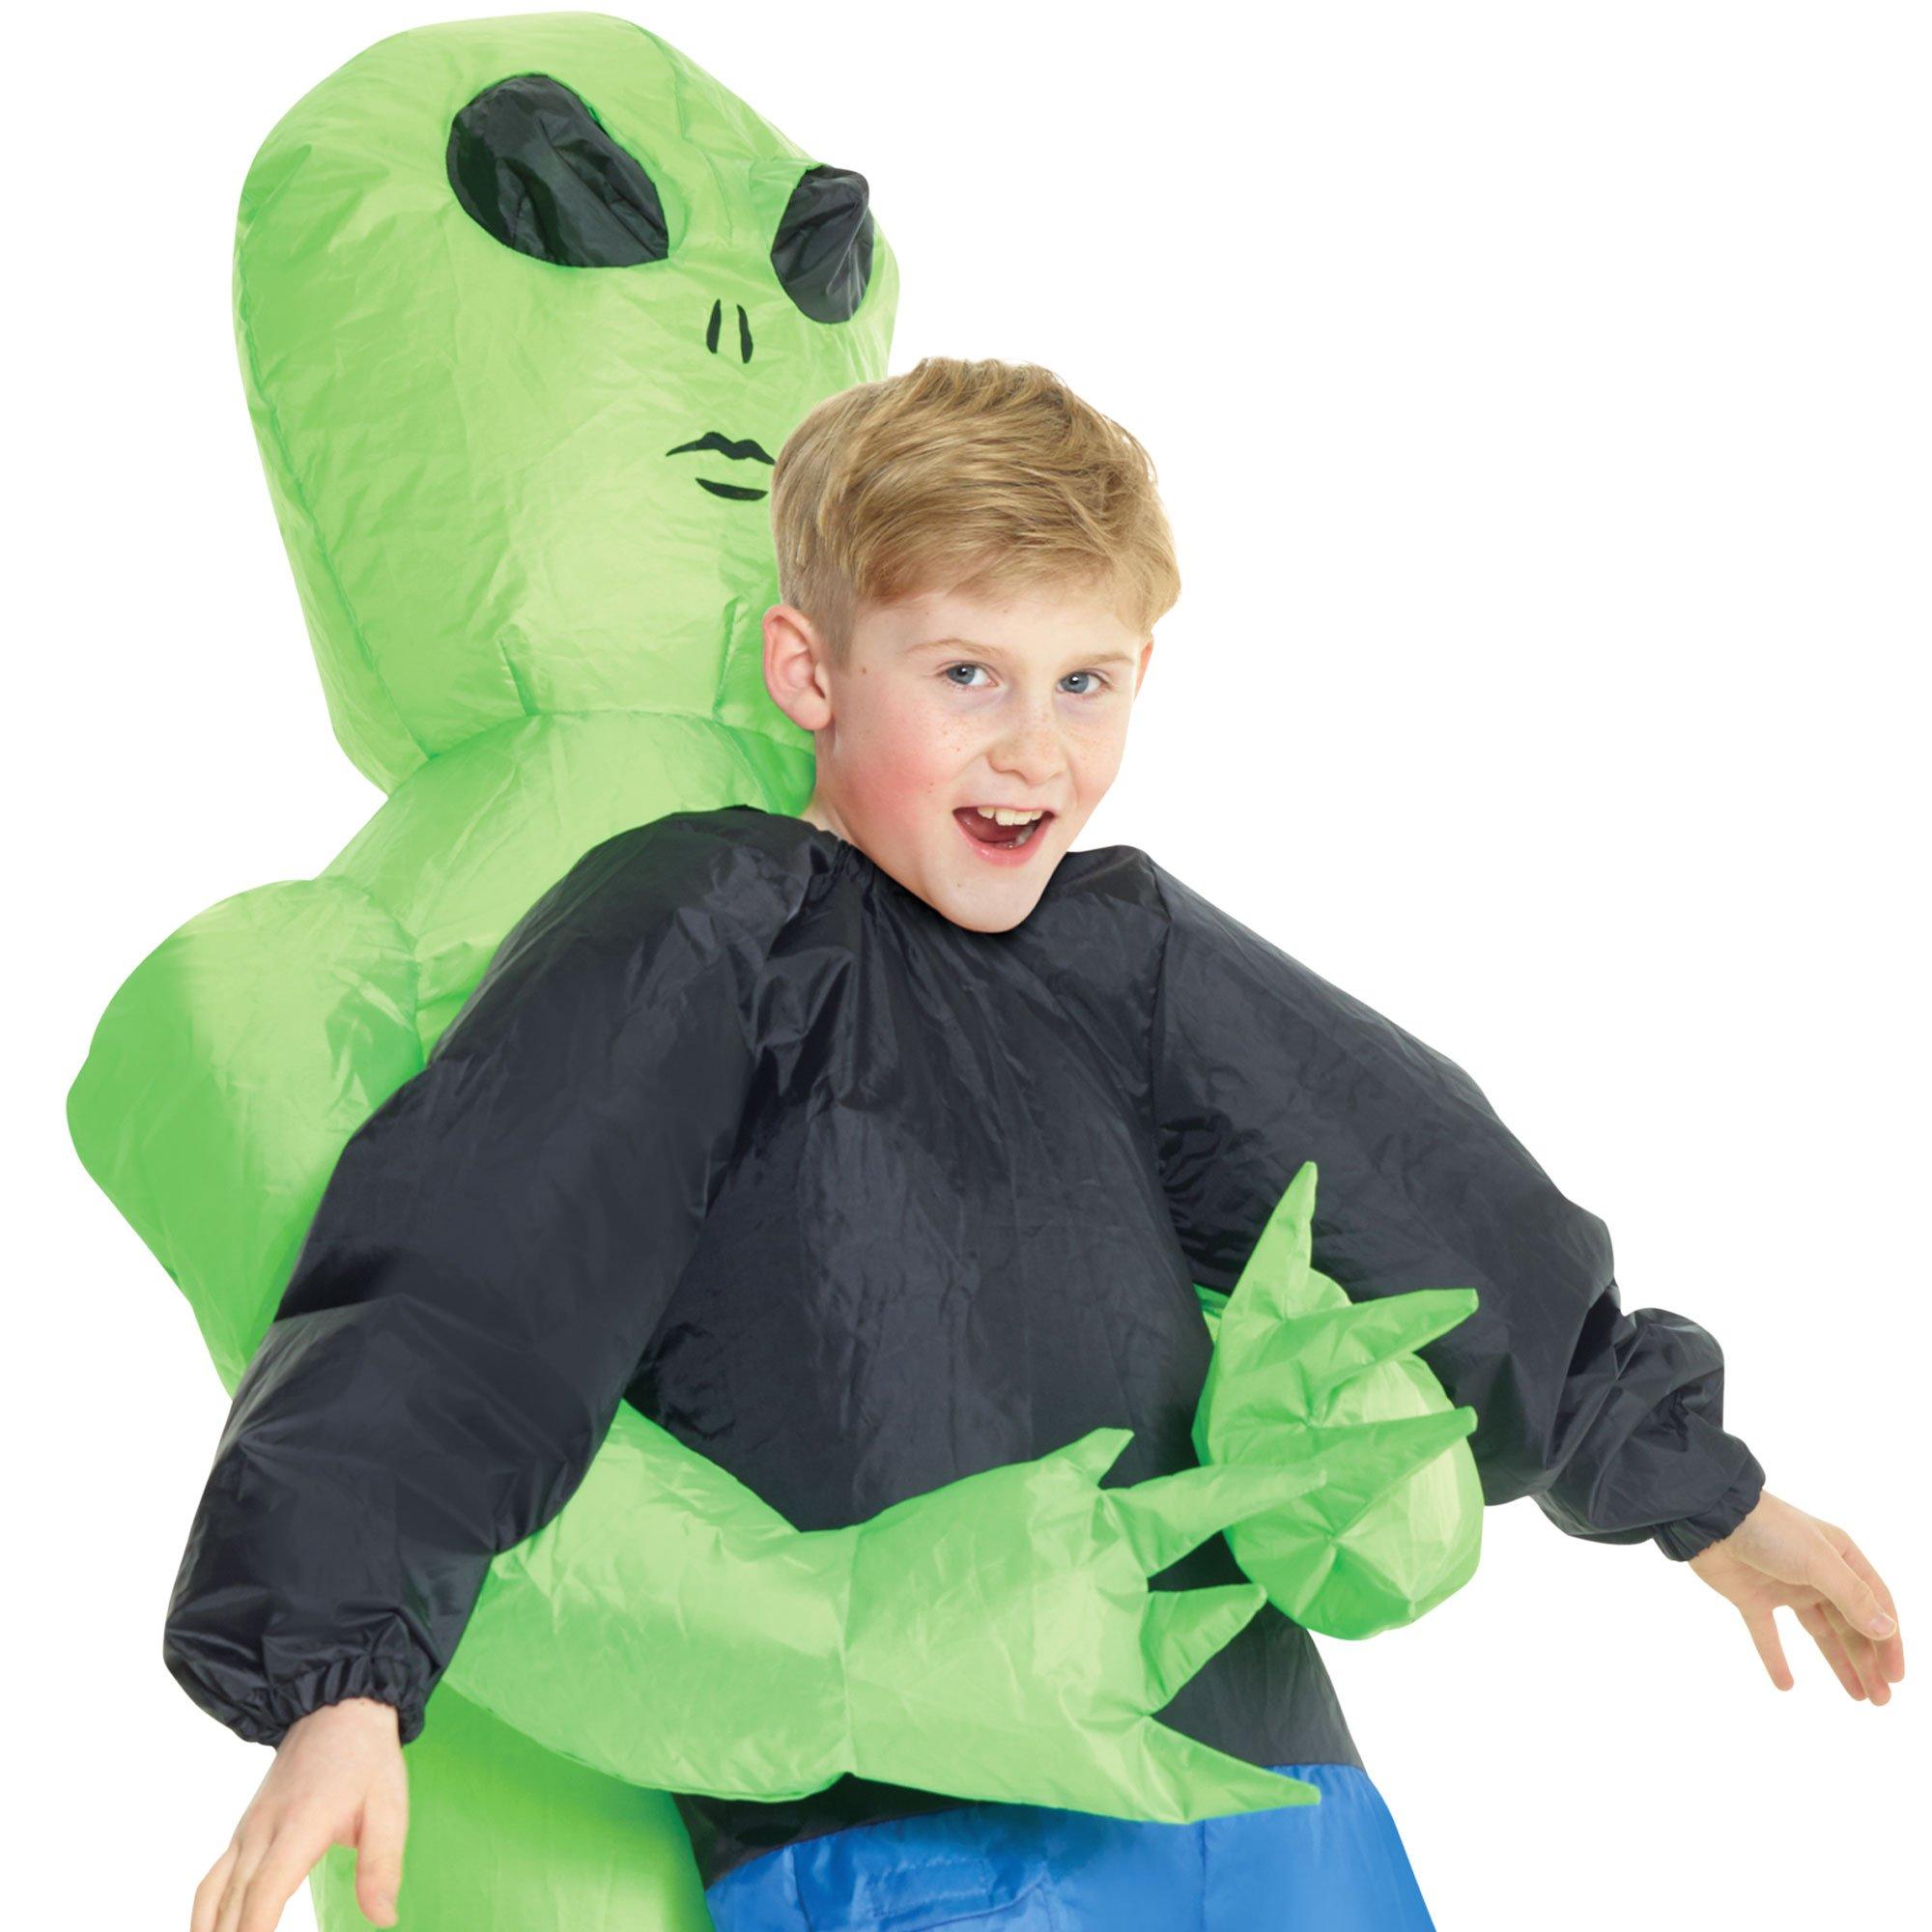 Child Inflatable Alien Pick-Me-Up Costume | Party City